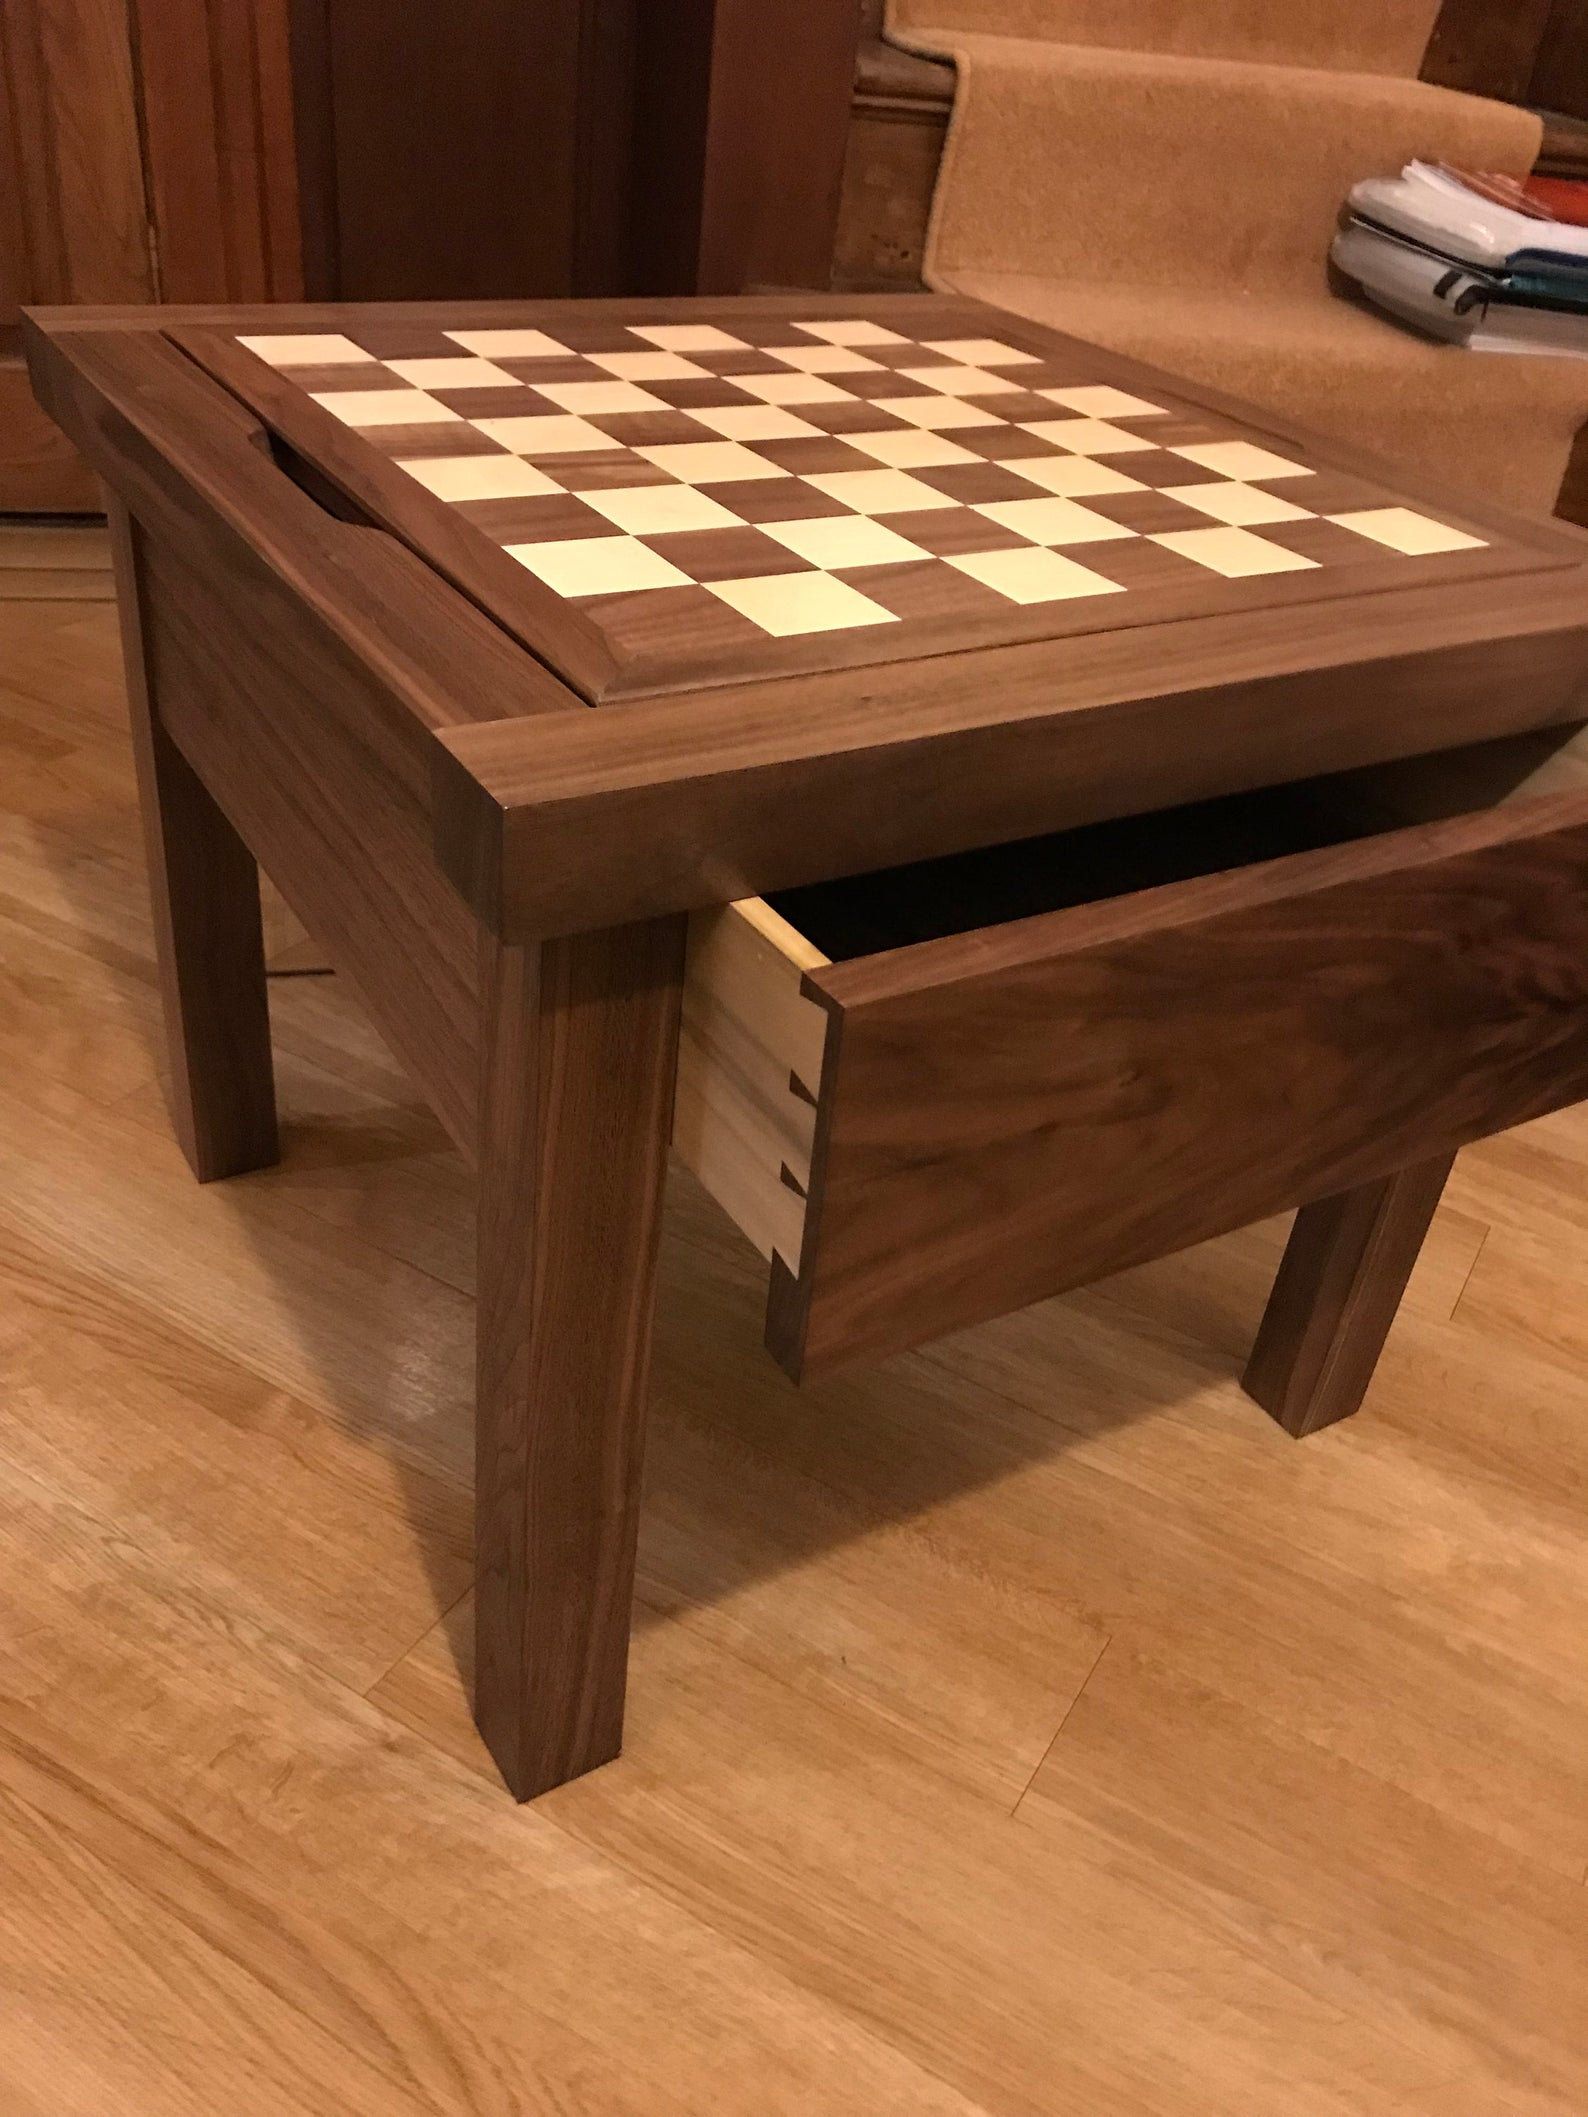 Disappointment upper mouth Chess tables - Chess Forums - Chess.com